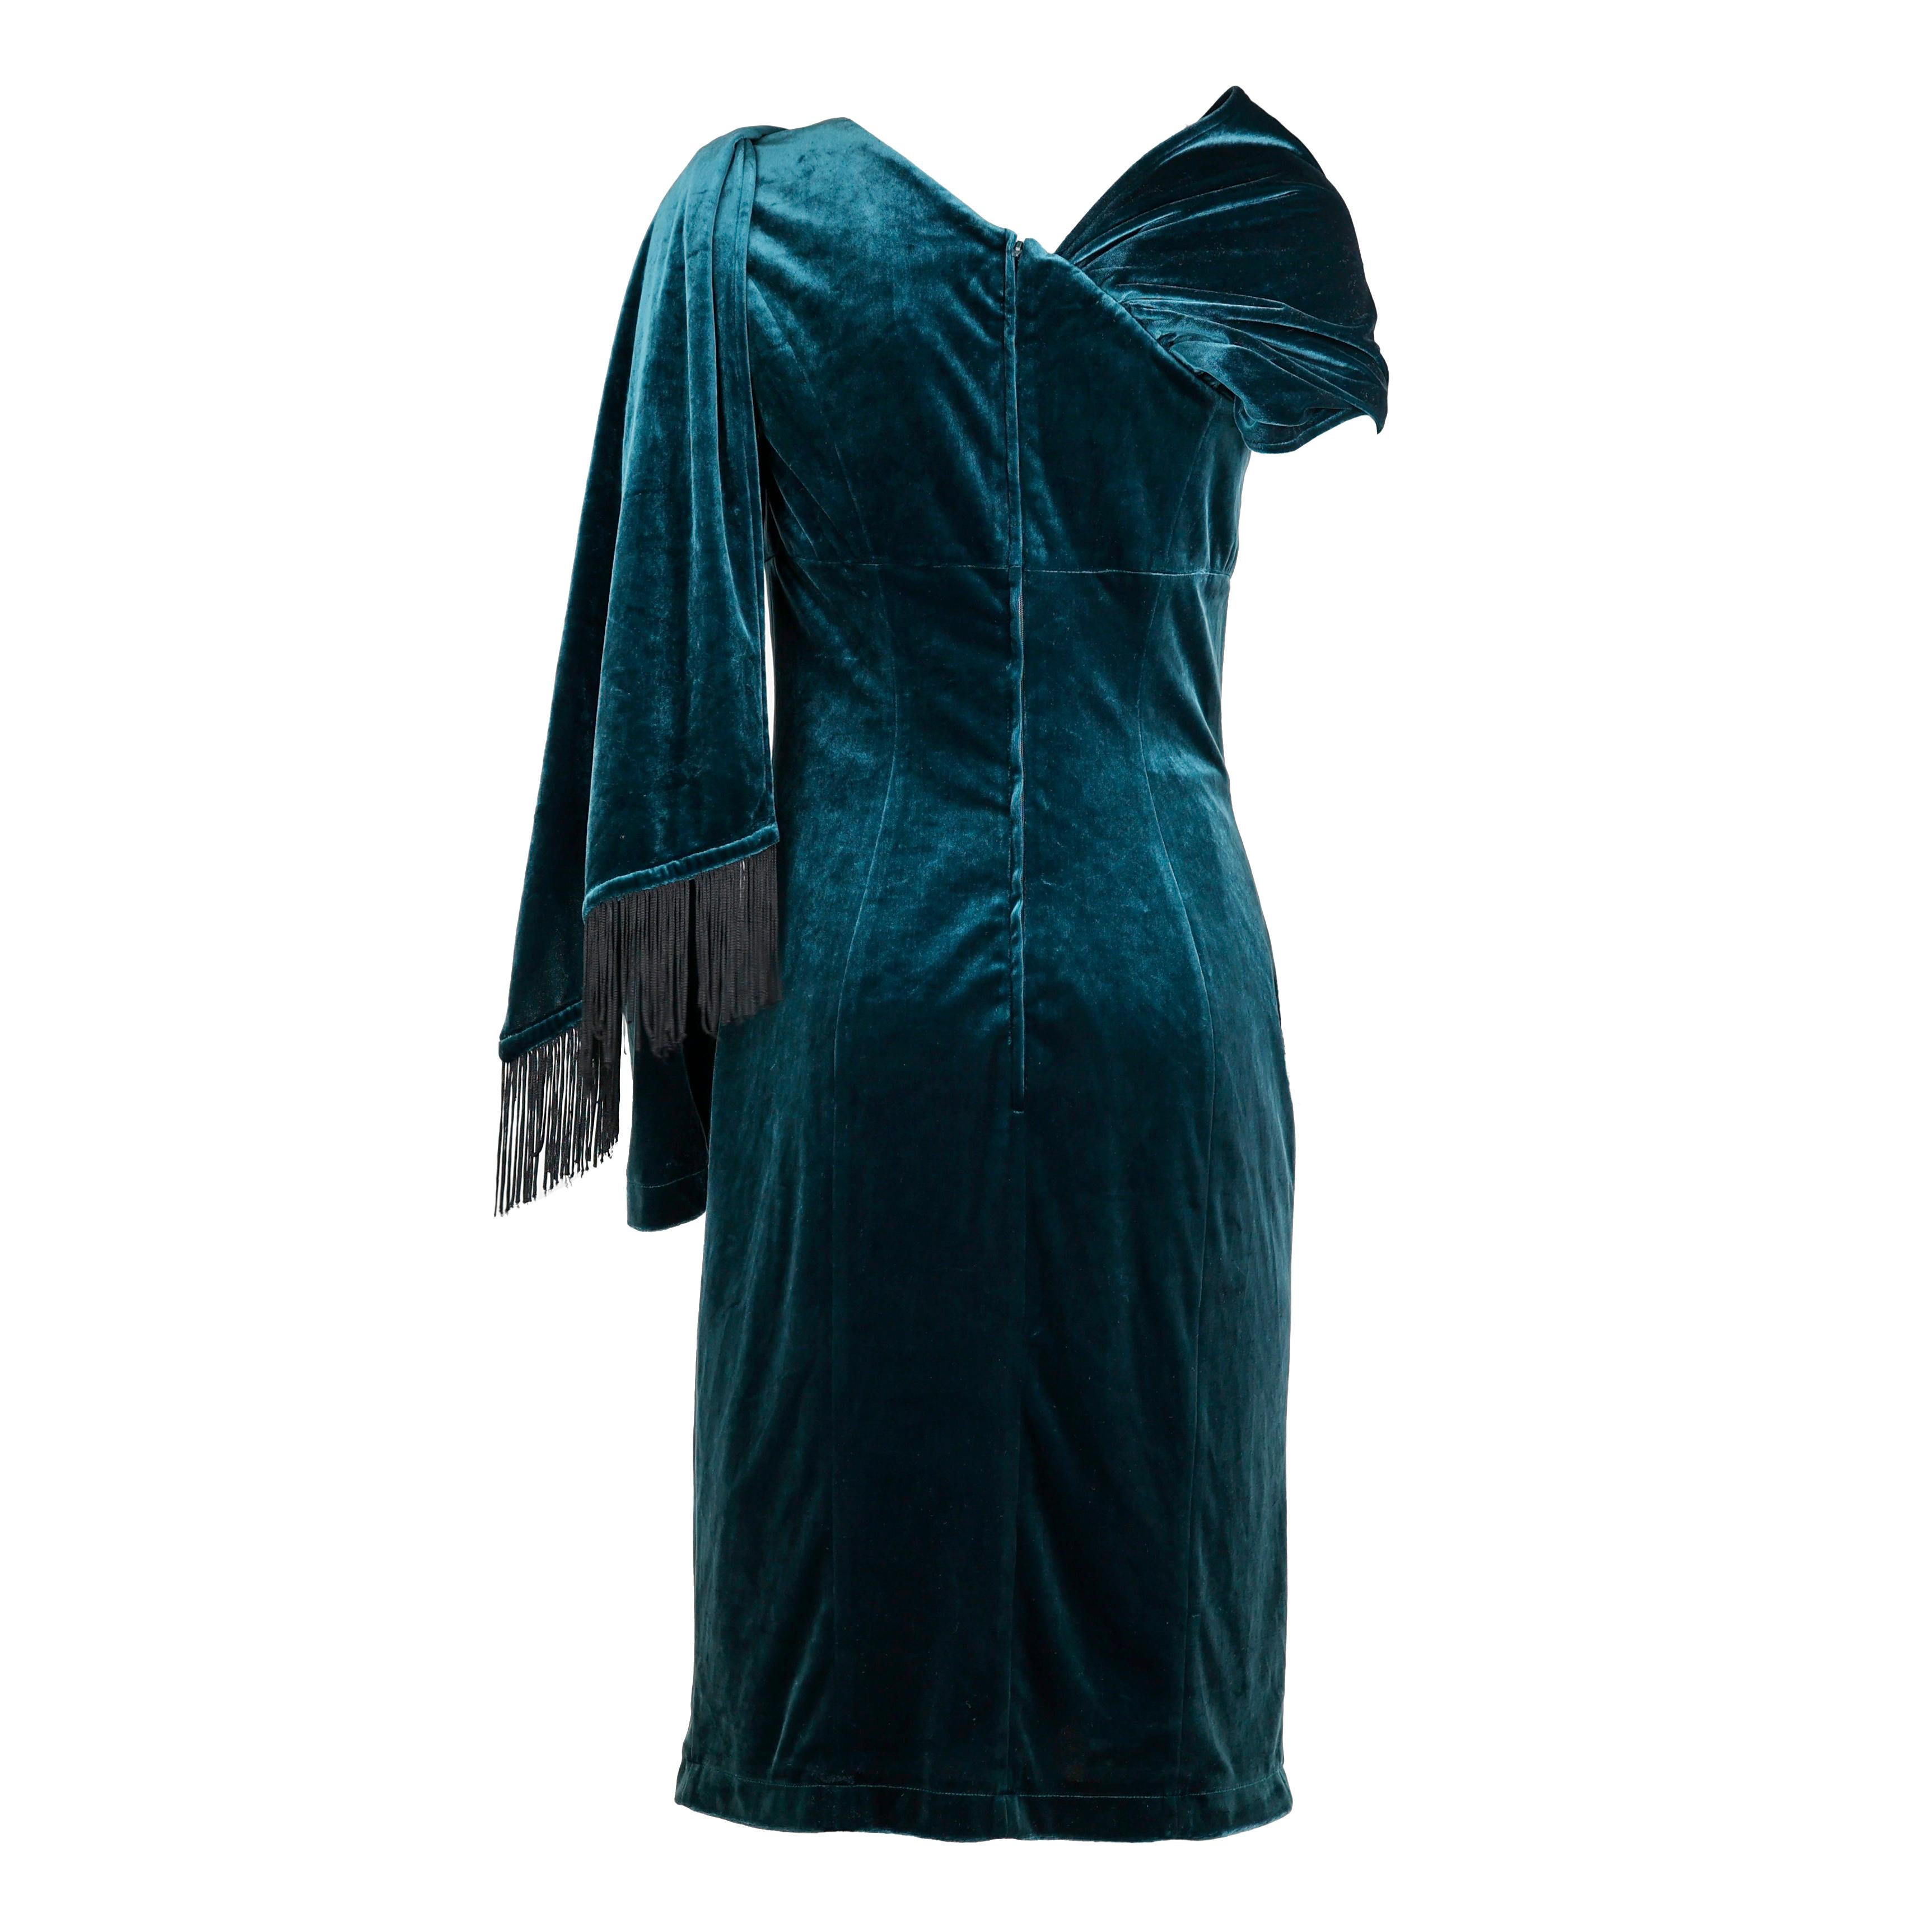 Mugler dress in velvet color turquoise, size S.

Condition:
Really good.

Packing/accessories:
Hanger.